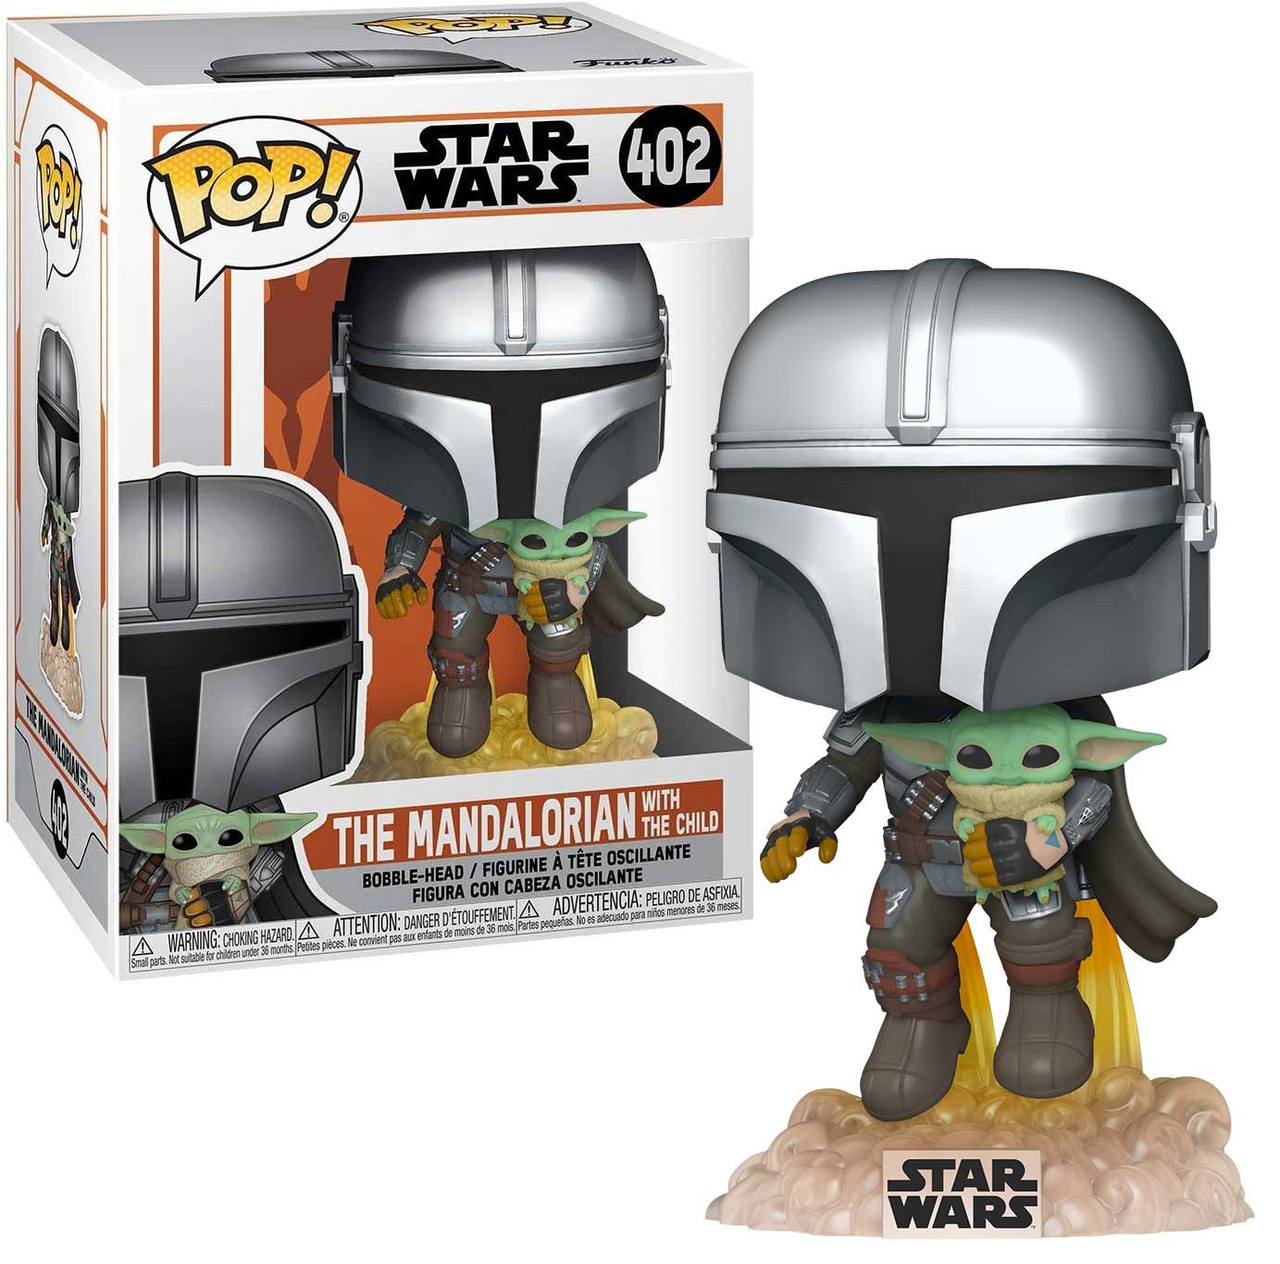 Funko Star Wars The Mandalorian Pop Star Wars The Mandalorian With The Child Vinyl Figure 402 Flying With Jet Pack Toywiz - boba fetts jetpack roblox